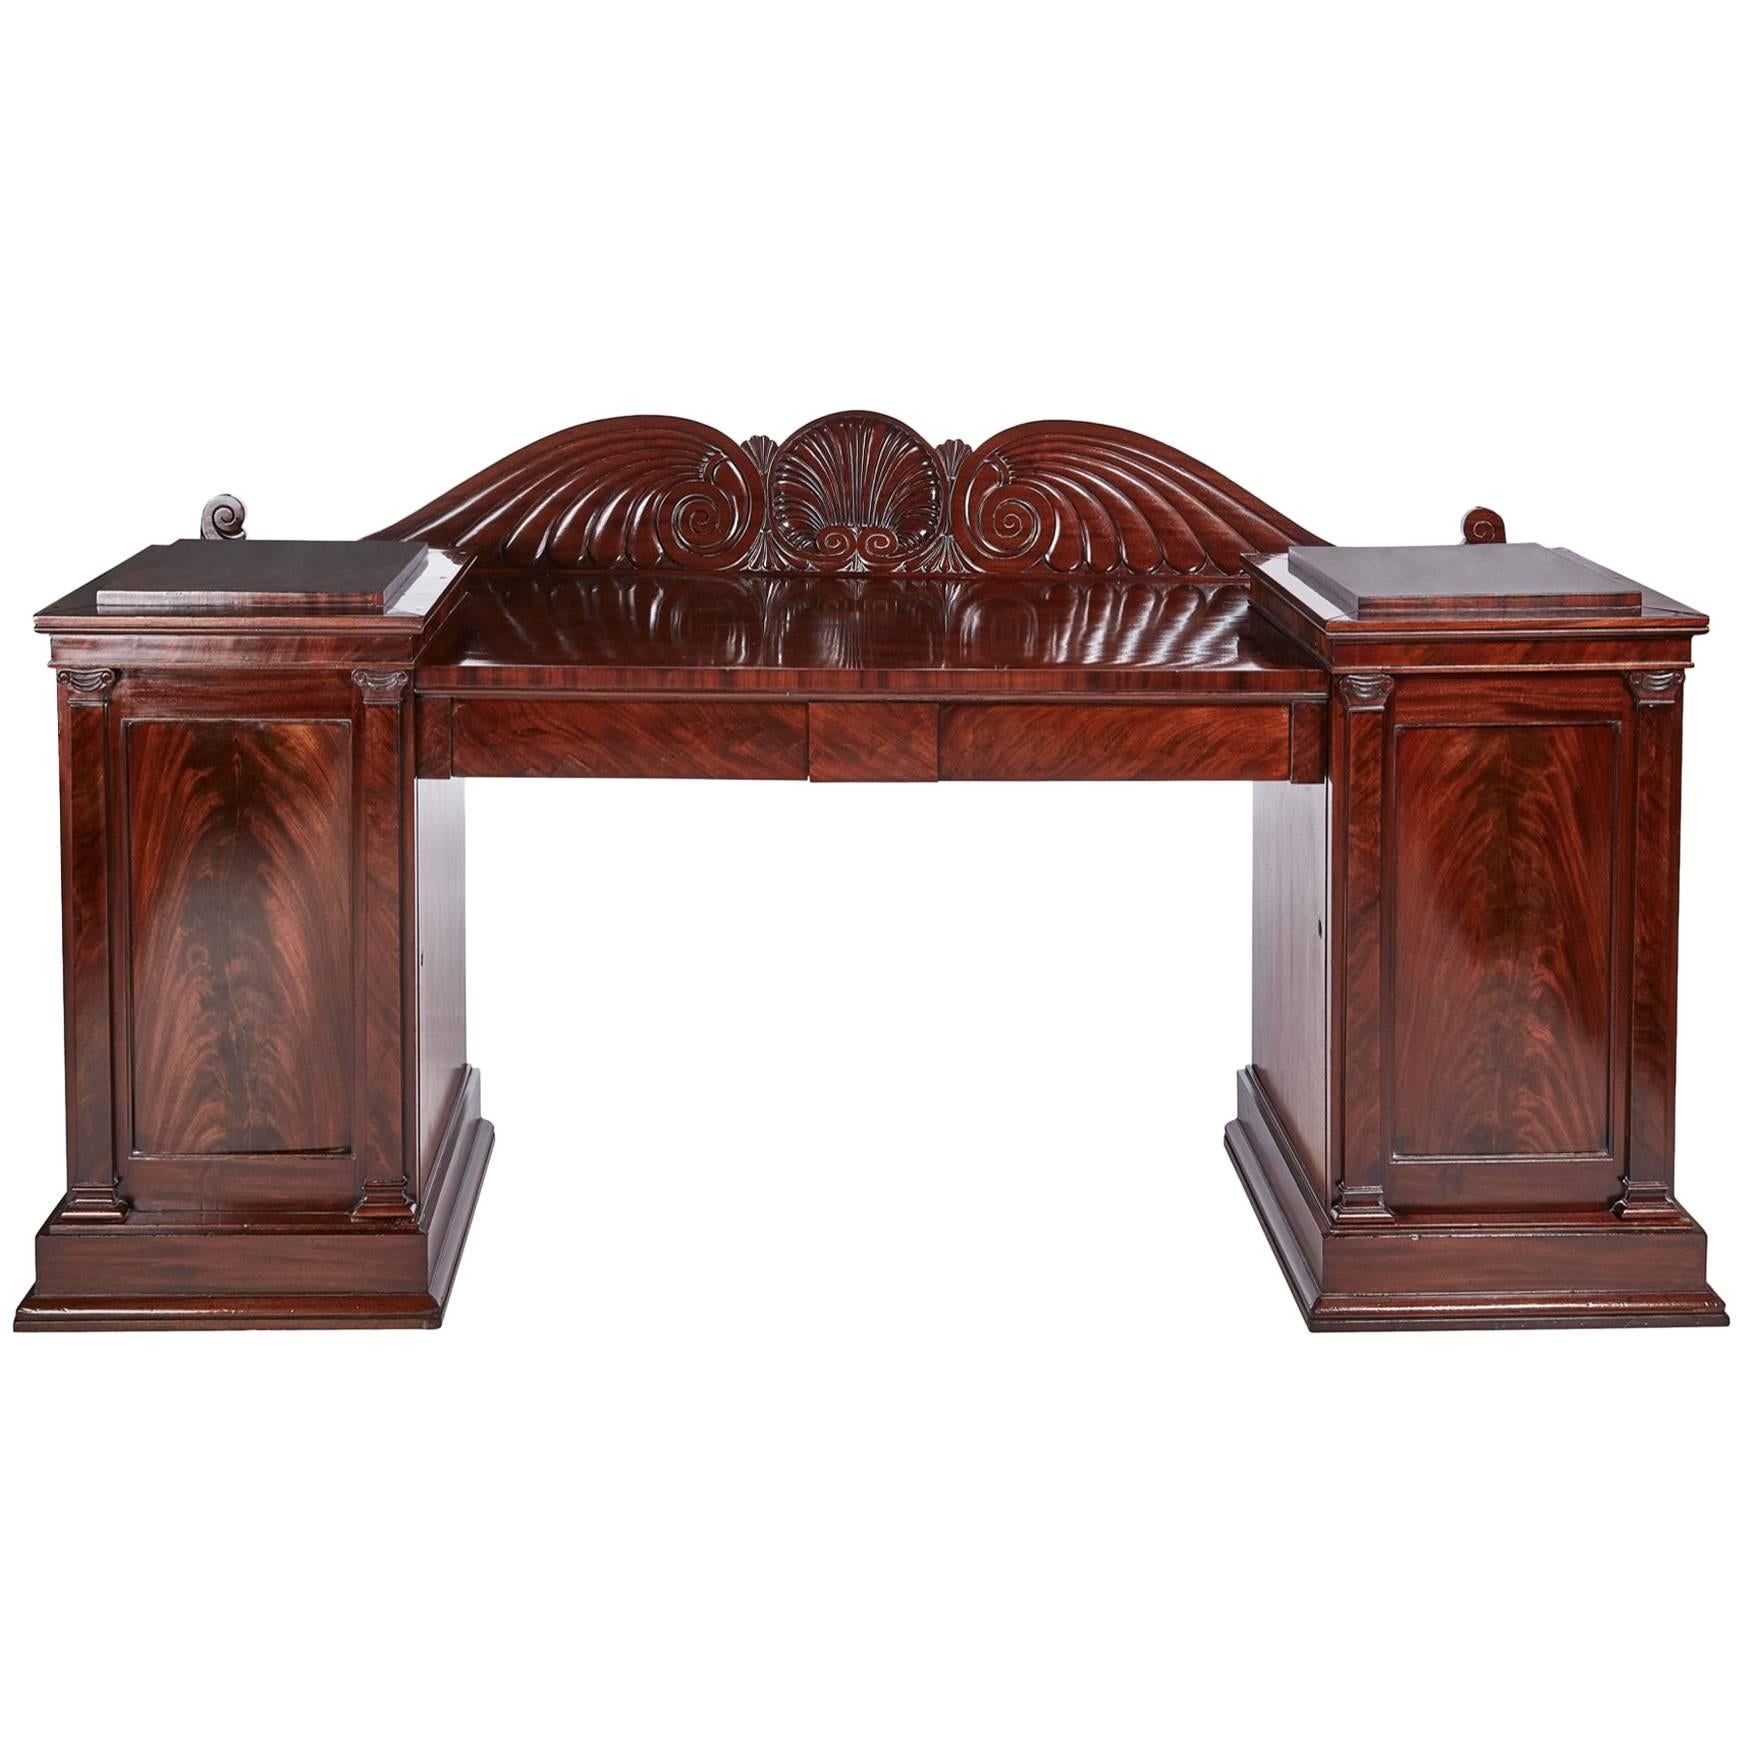 Outstanding Quality Antique Mahogany Sideboard For Sale